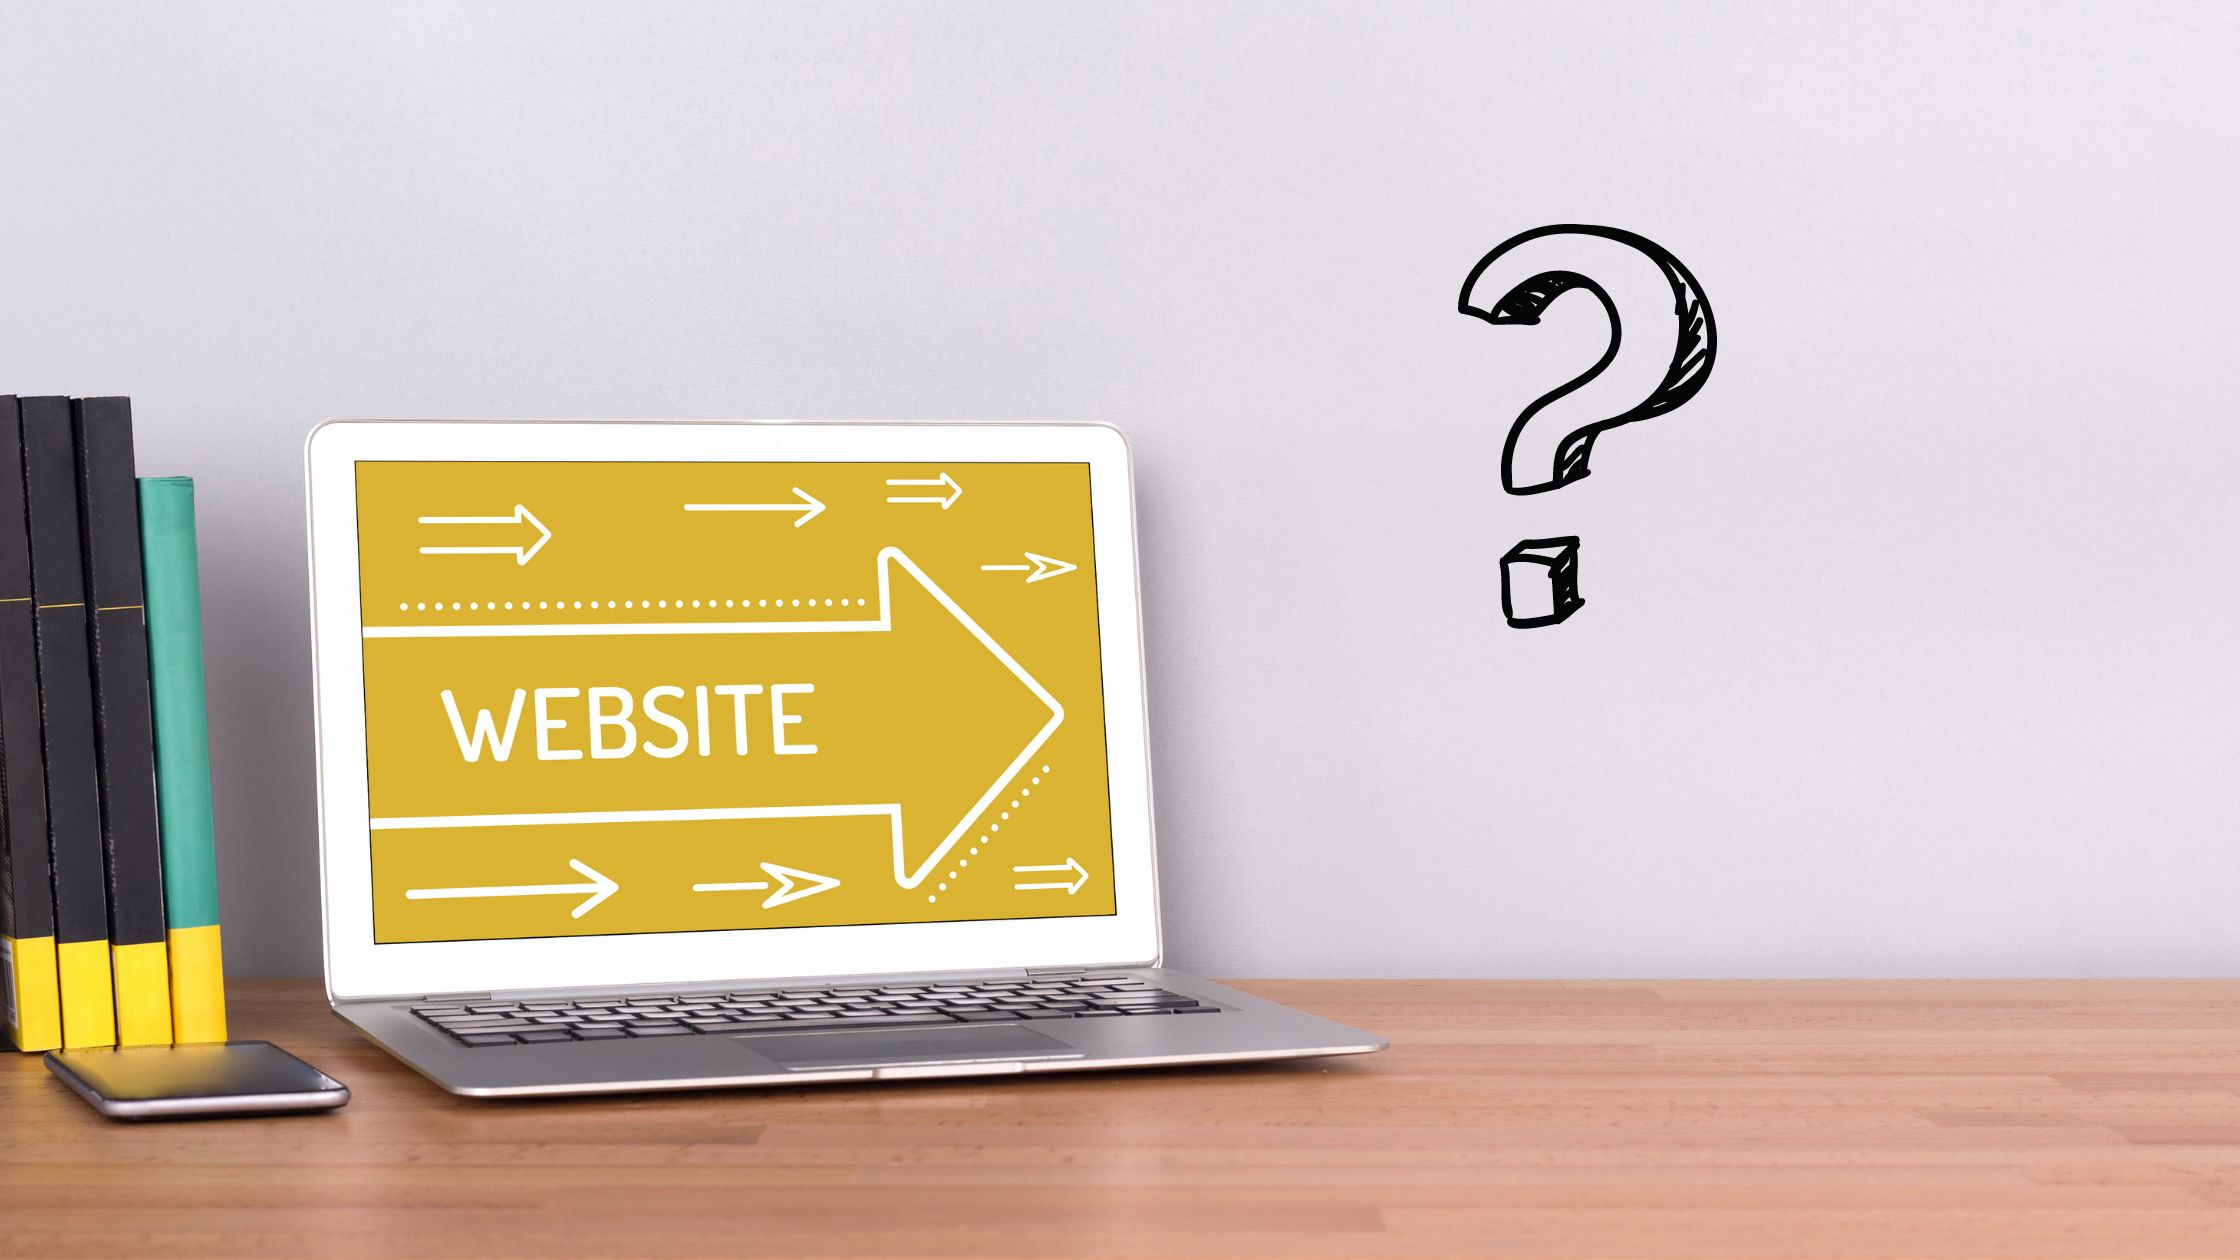 Why Website is Crucial for Businesses?